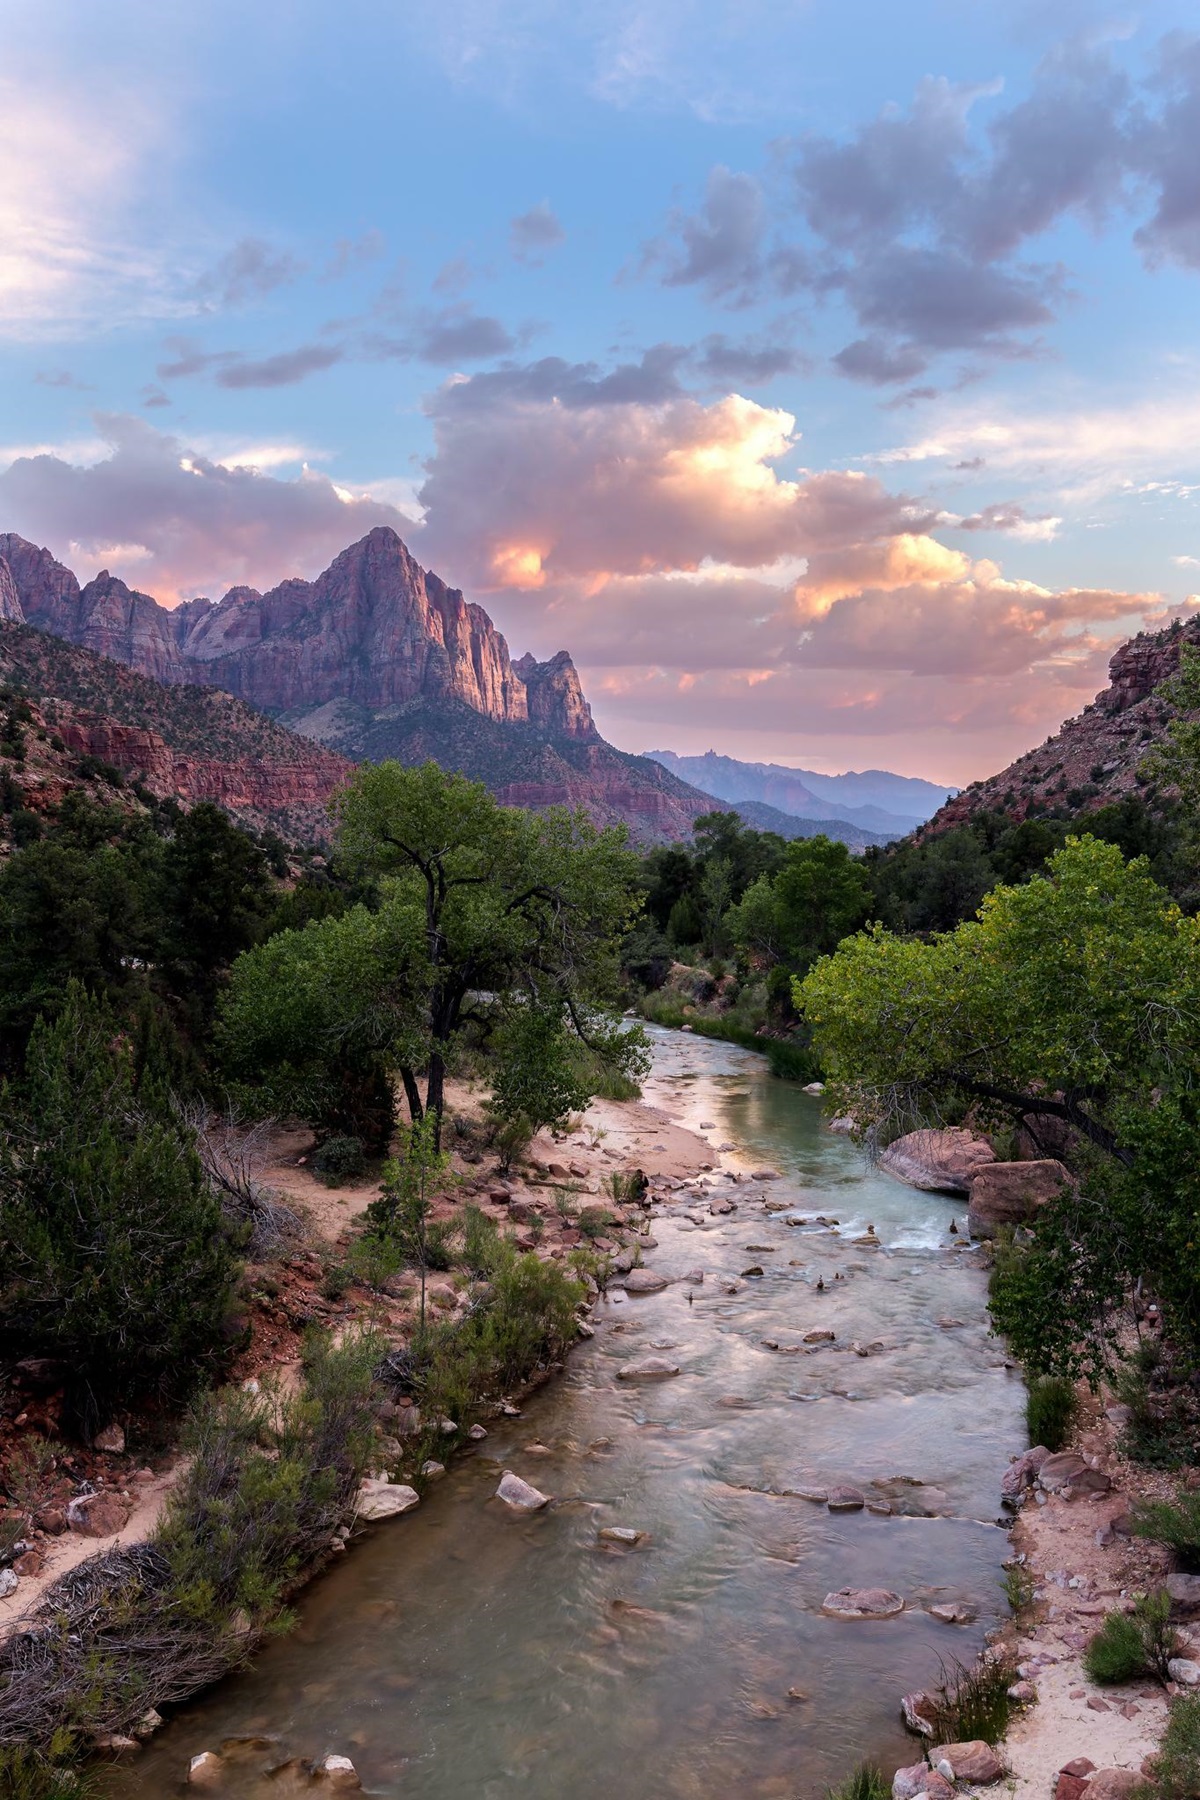 Probably The Easiest Shot You Can Take In Zion And Arguably The Best Spot! Zion National Park